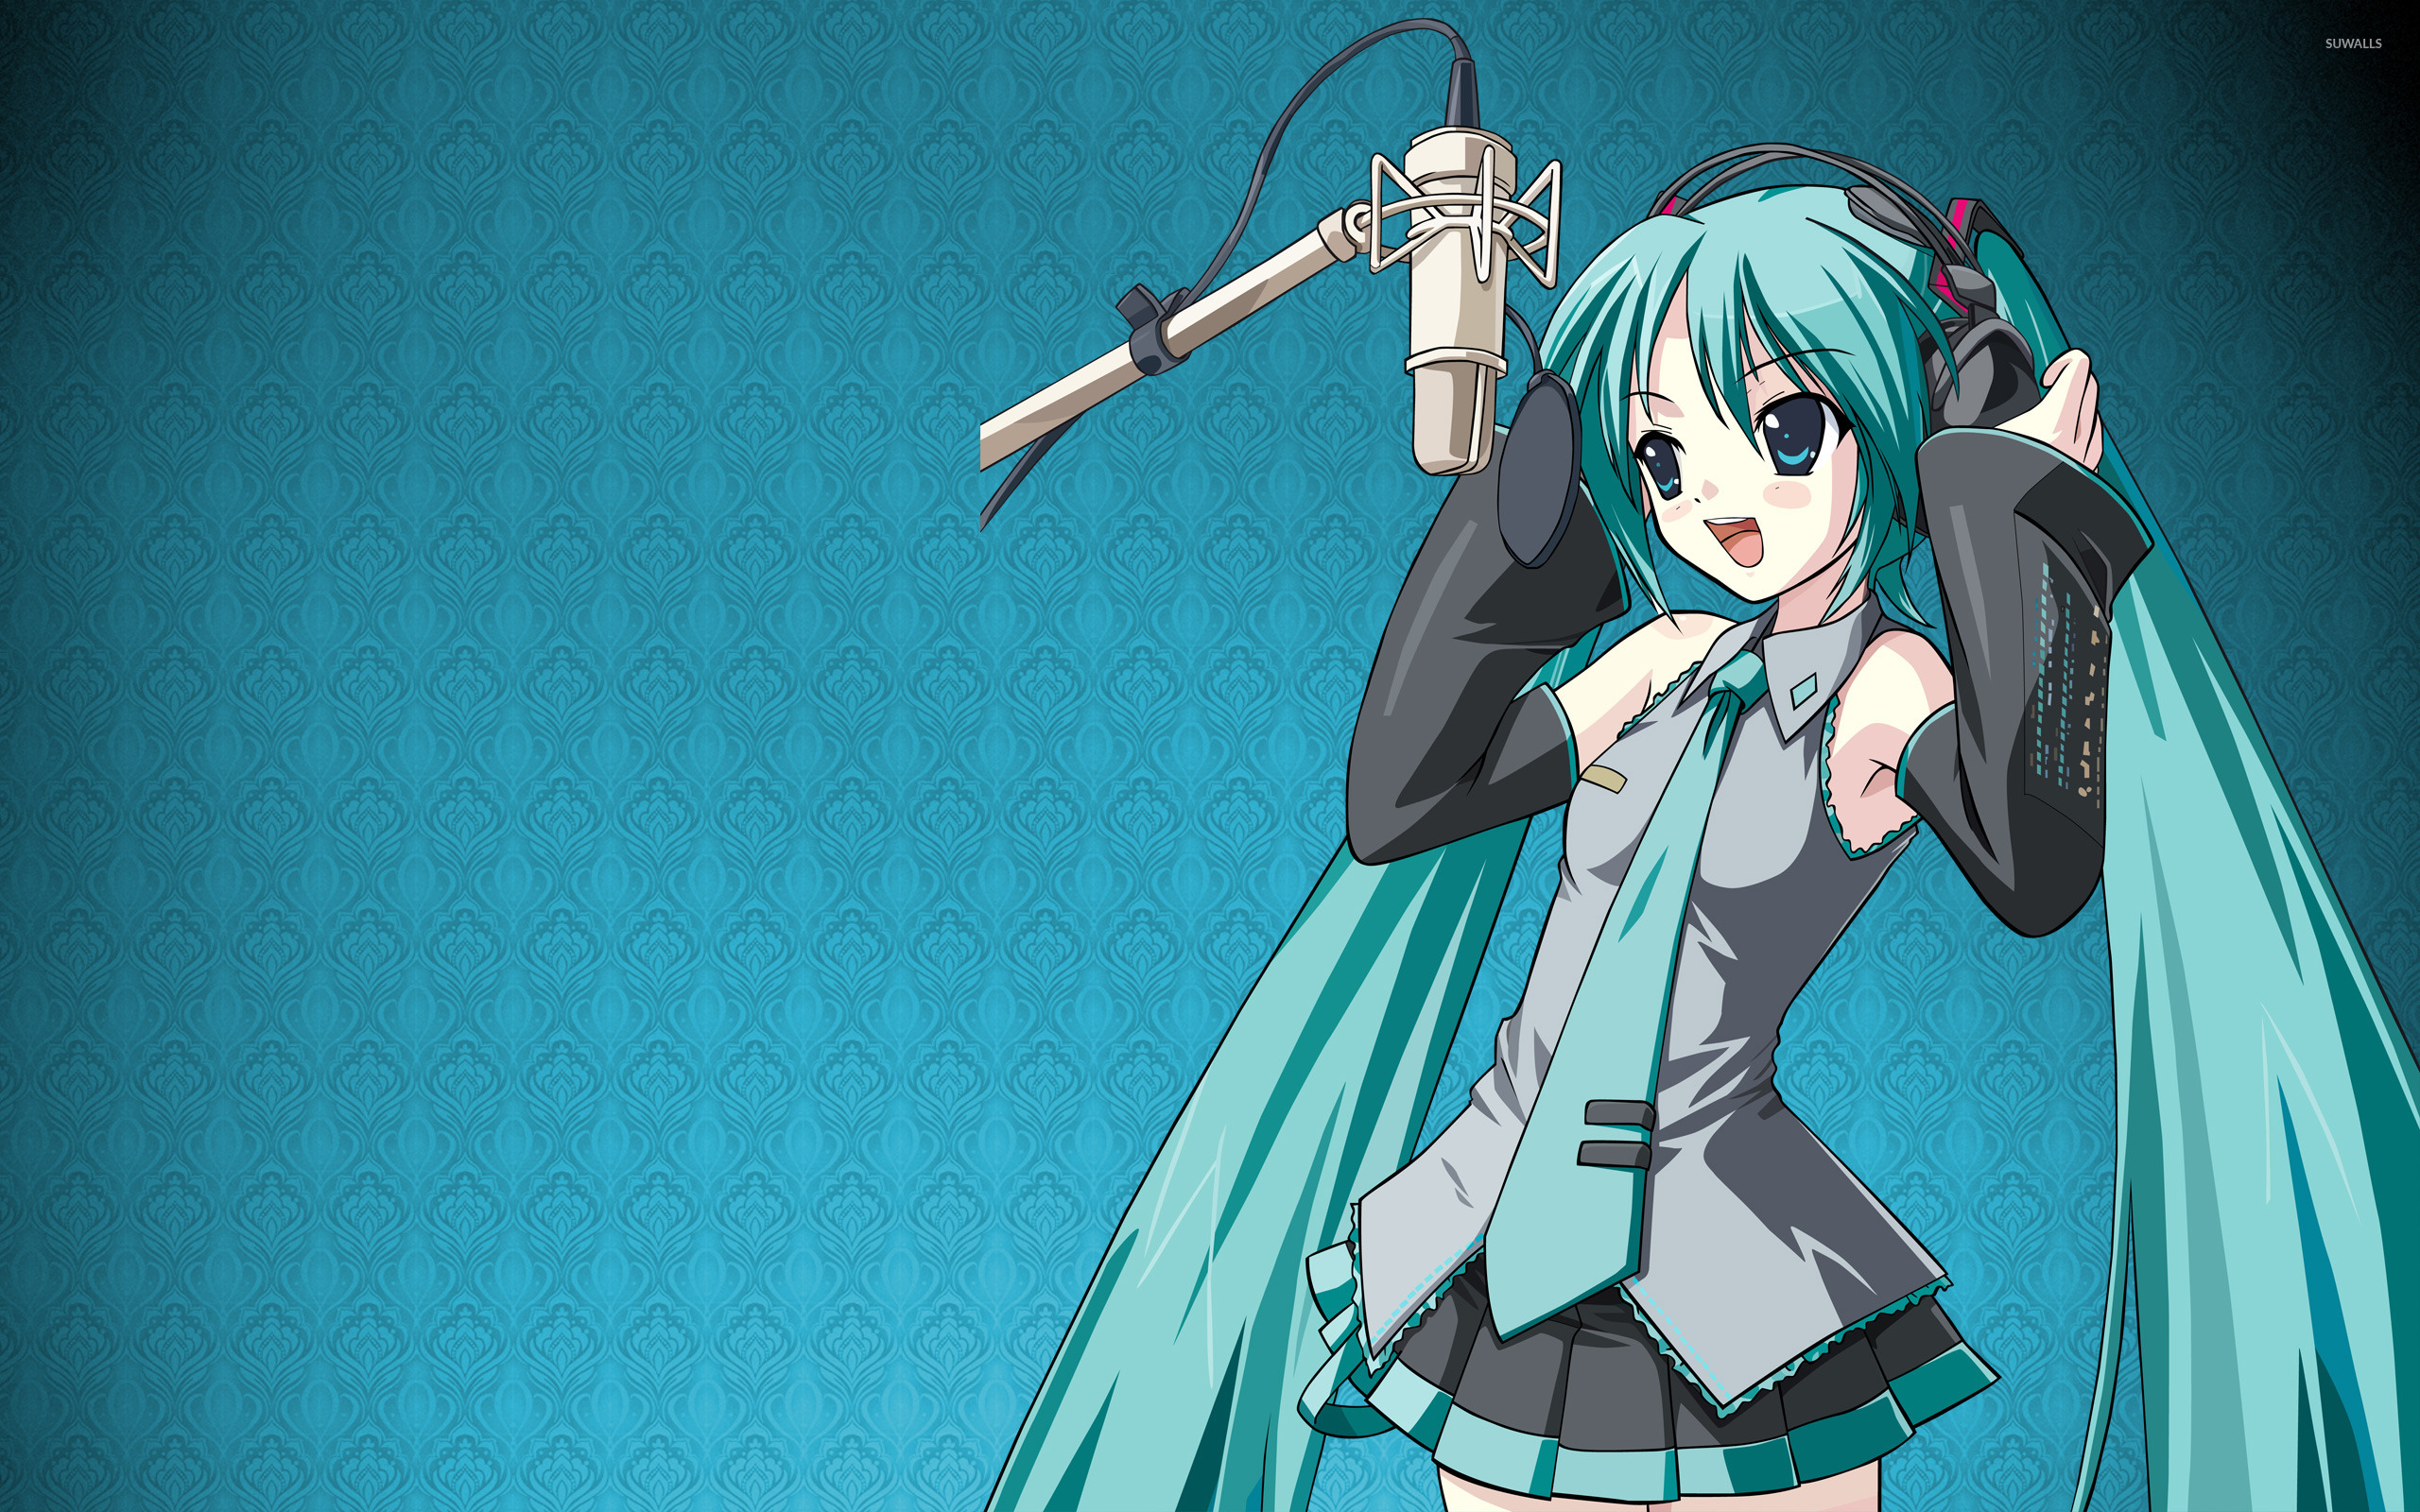 Hatsune Miku Wallpaper Images Pictures   Becuo